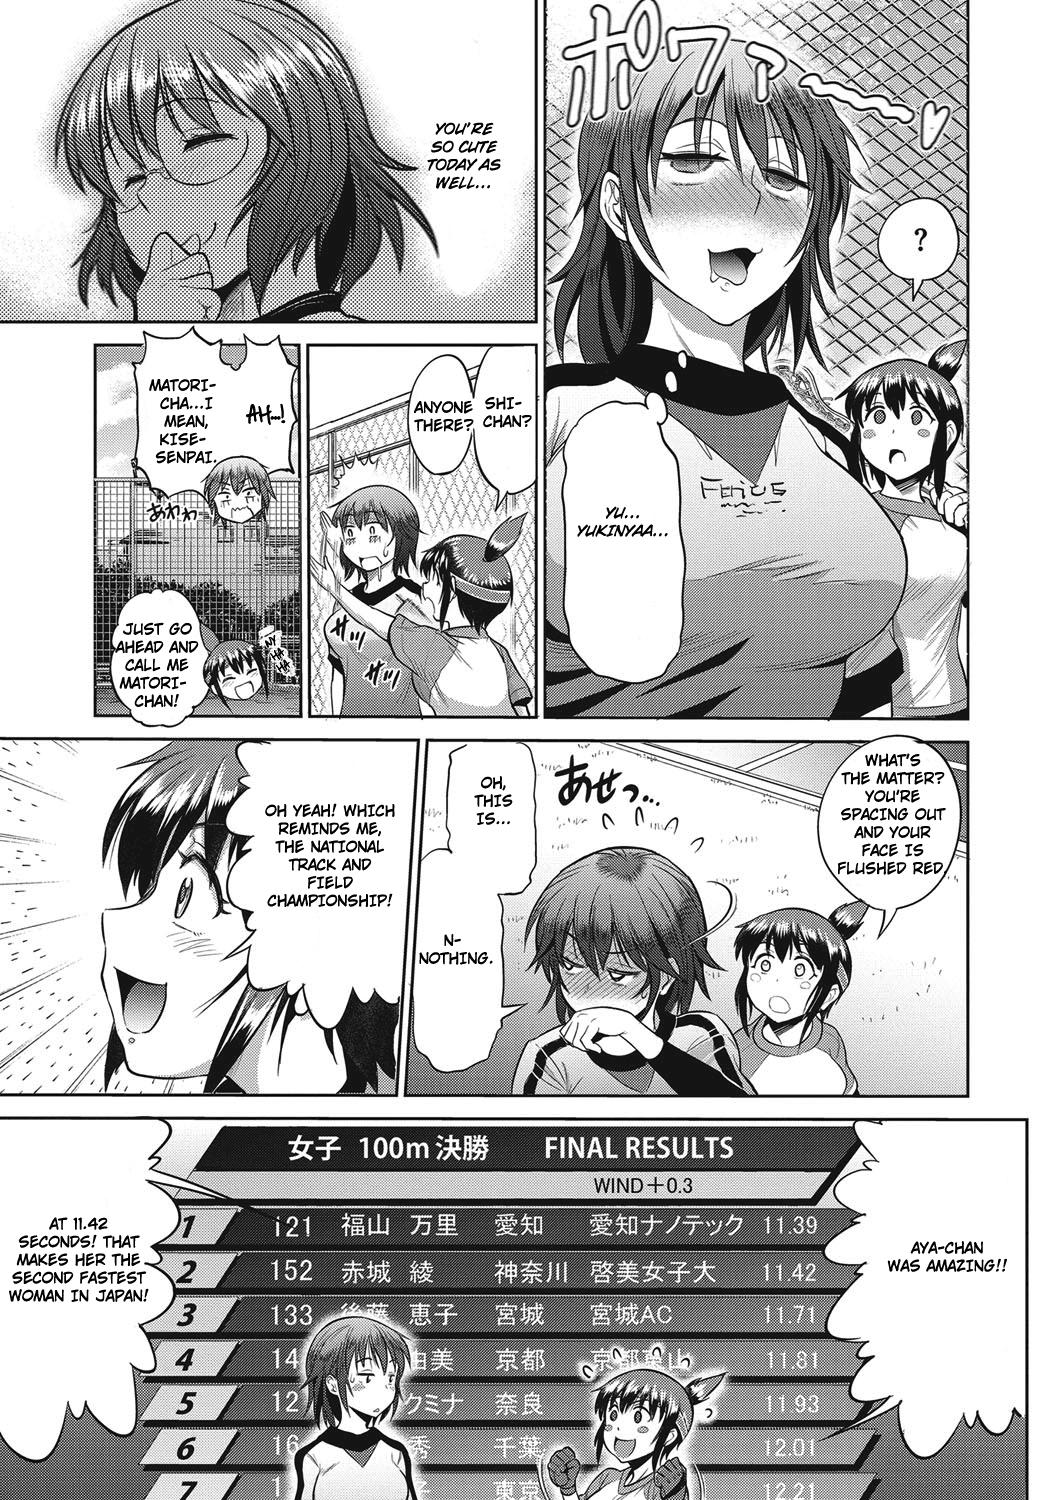 Sexy Whores [DISTANCE] Joshi Lacu! - Girls Lacrosse Club ~2 Years Later~ Ch. 3 (COMIC ExE 04) [English] [TripleSevenScans] [Digital] Amatur Porn - Page 11